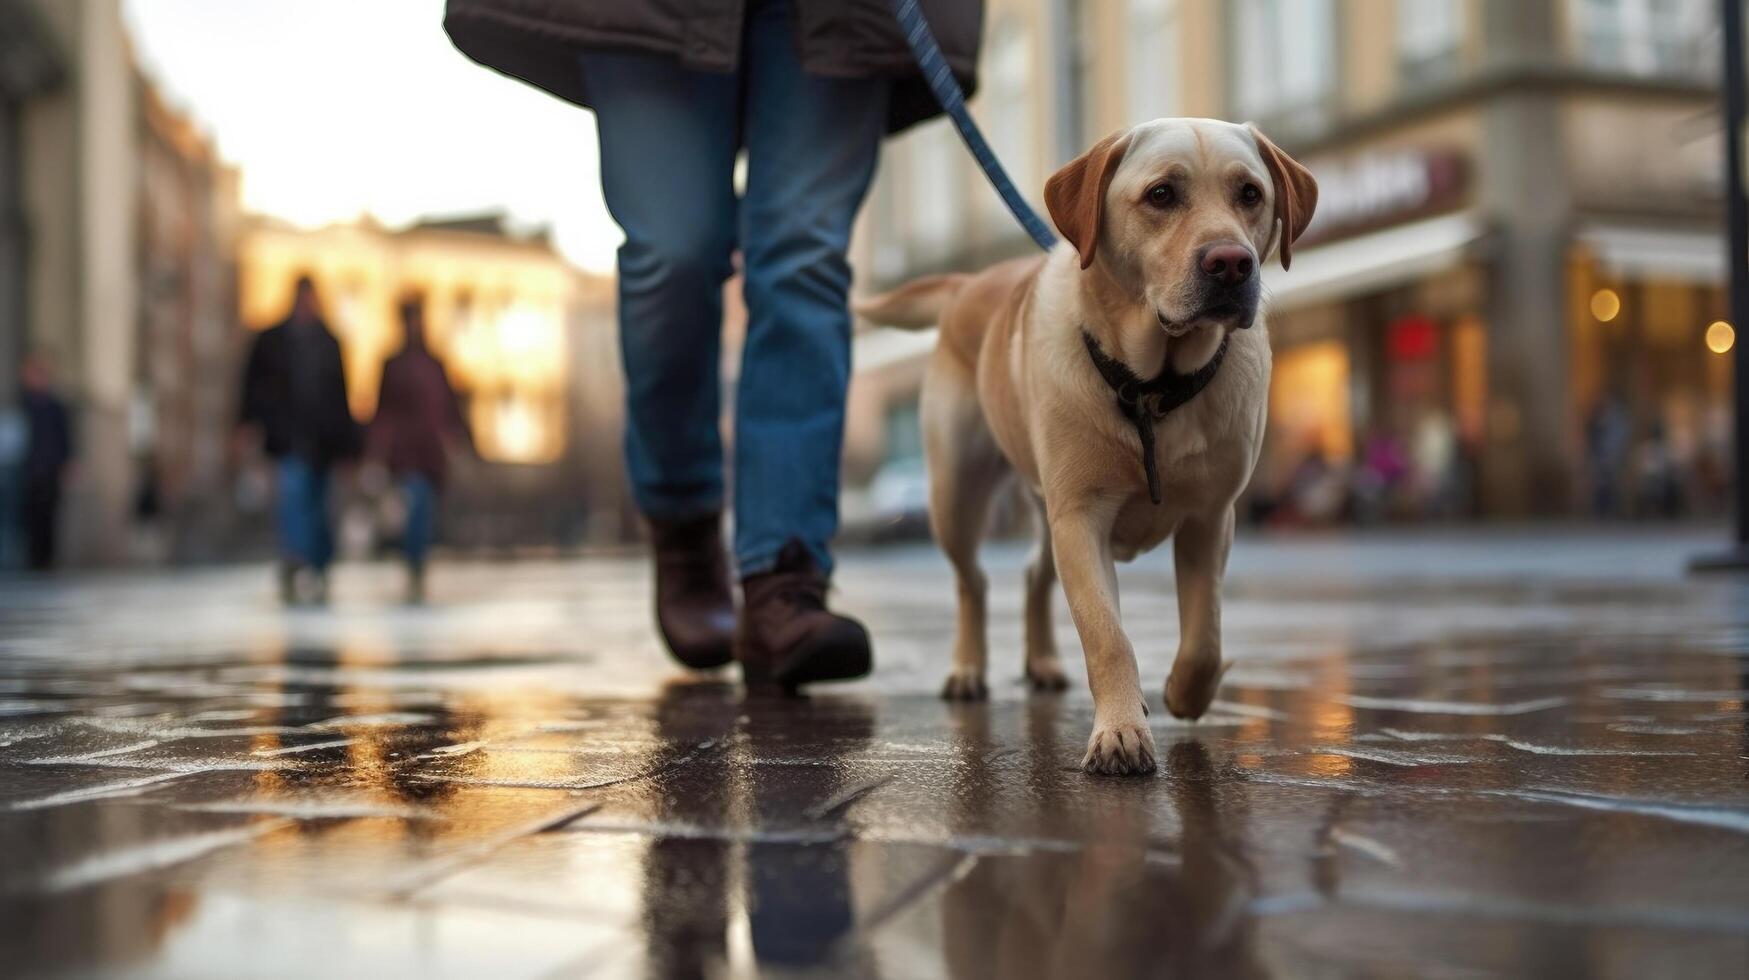 Owner and dog walking in city. Illustration photo